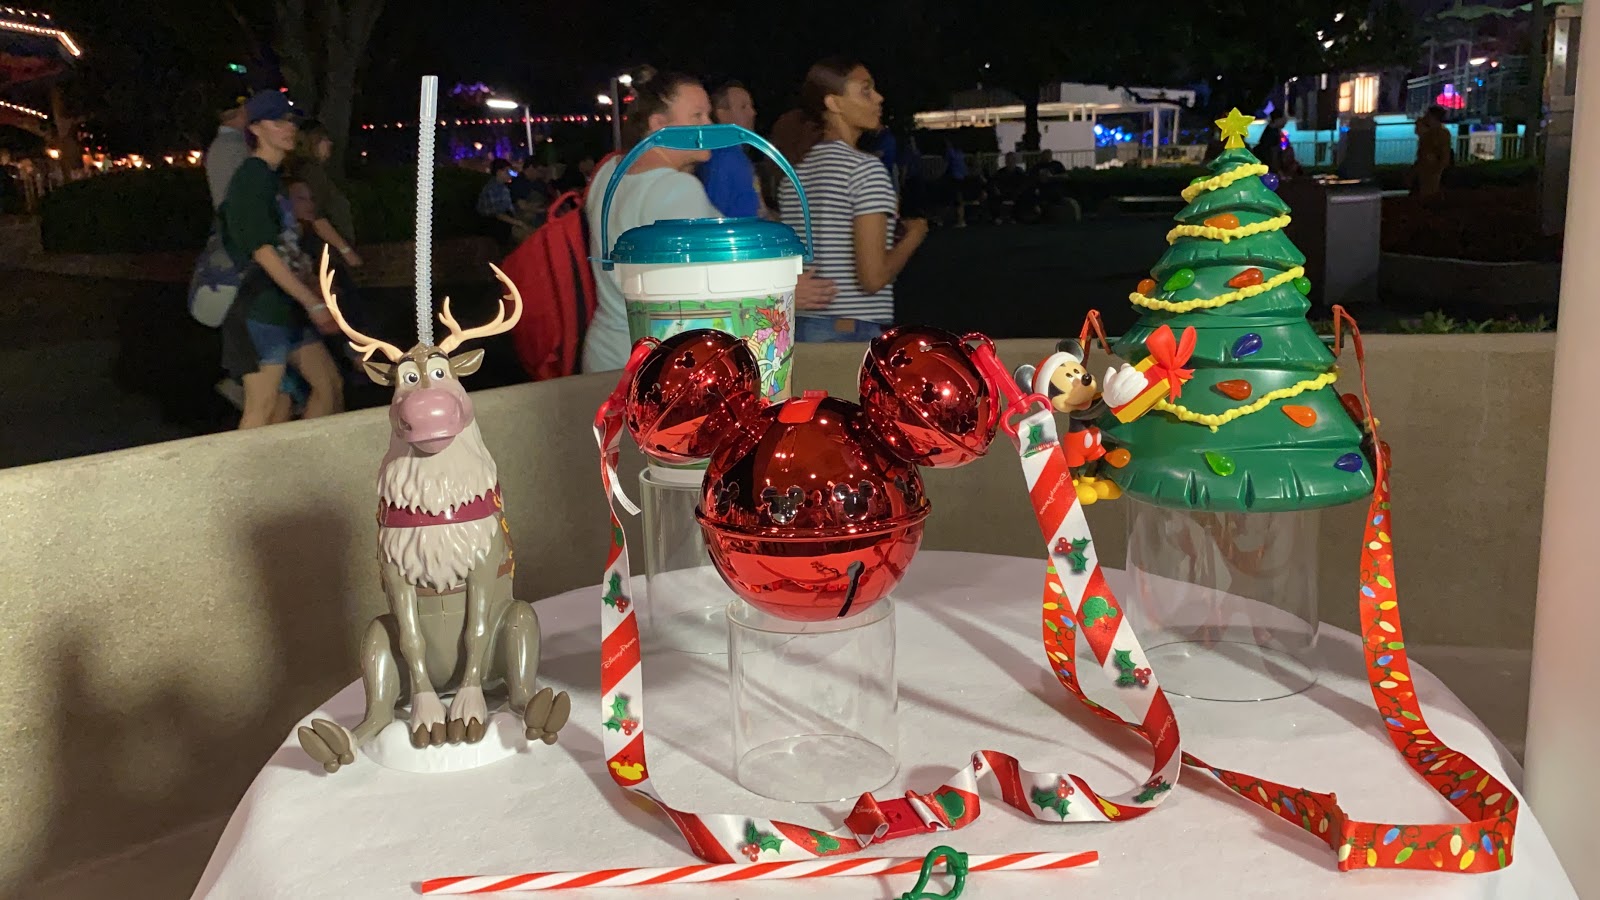 Recapping a 2019 Mickey’s Very Merry Christmas Party at Magic Kingdom - www.bagsaleusa.com